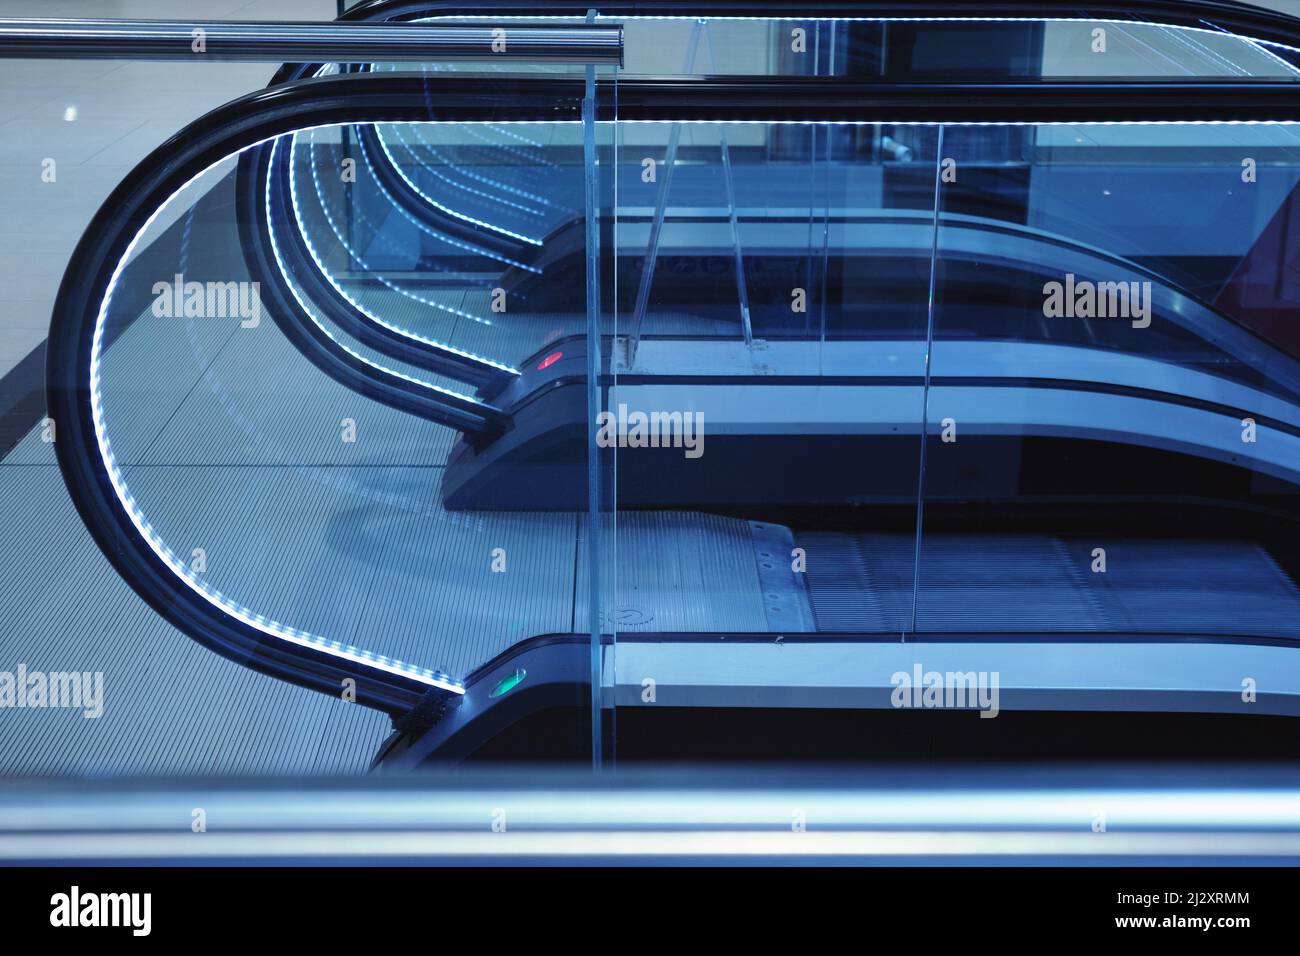 Escalators in the mall, close-up detail. Stock Photo